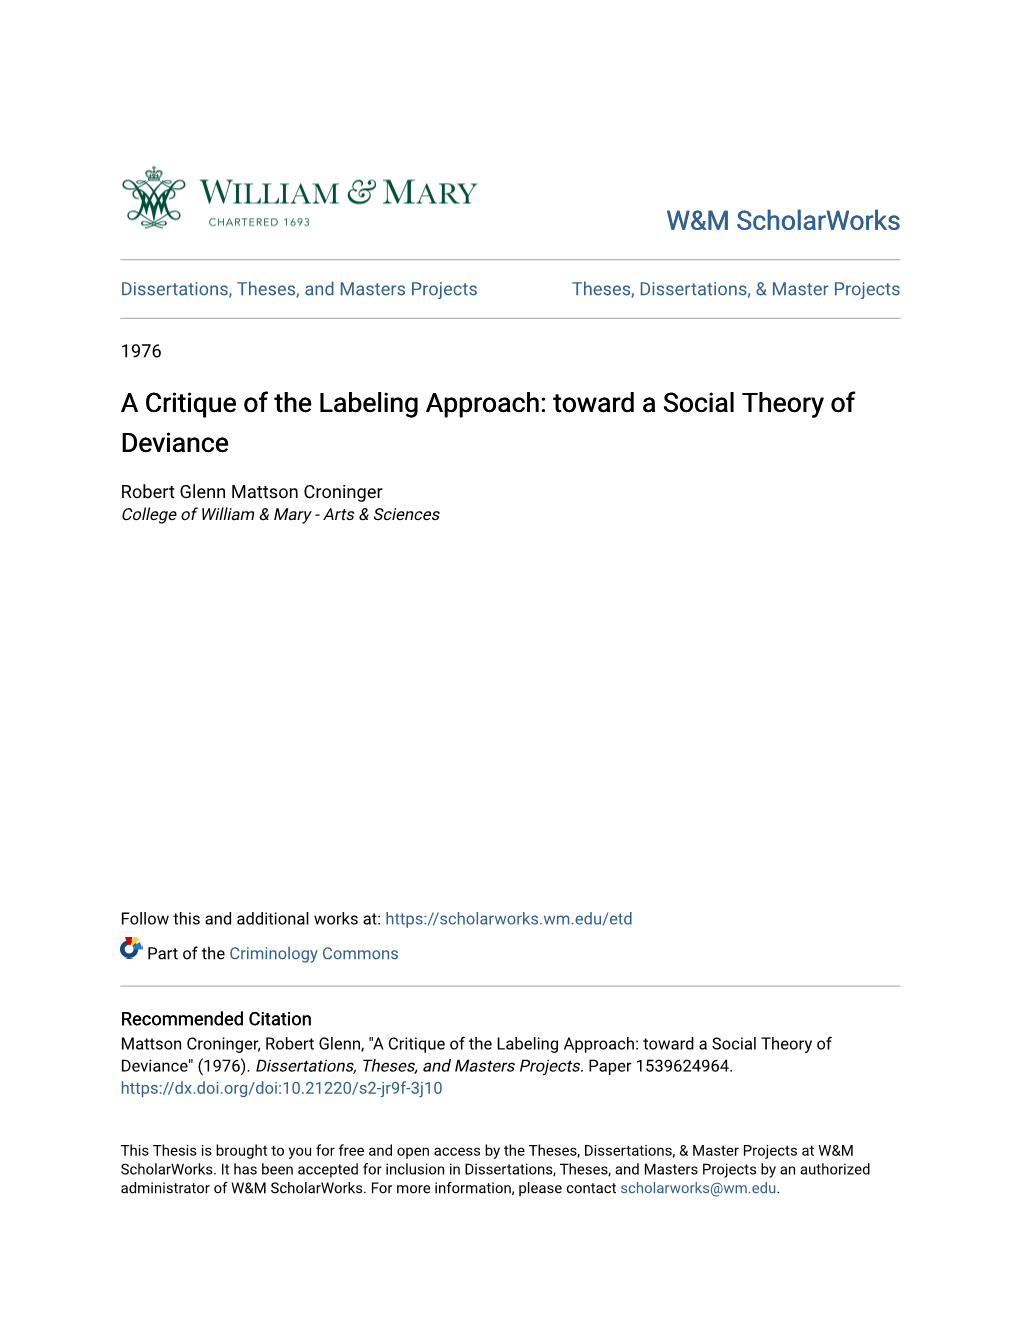 A Critique of the Labeling Approach: Toward a Social Theory of Deviance